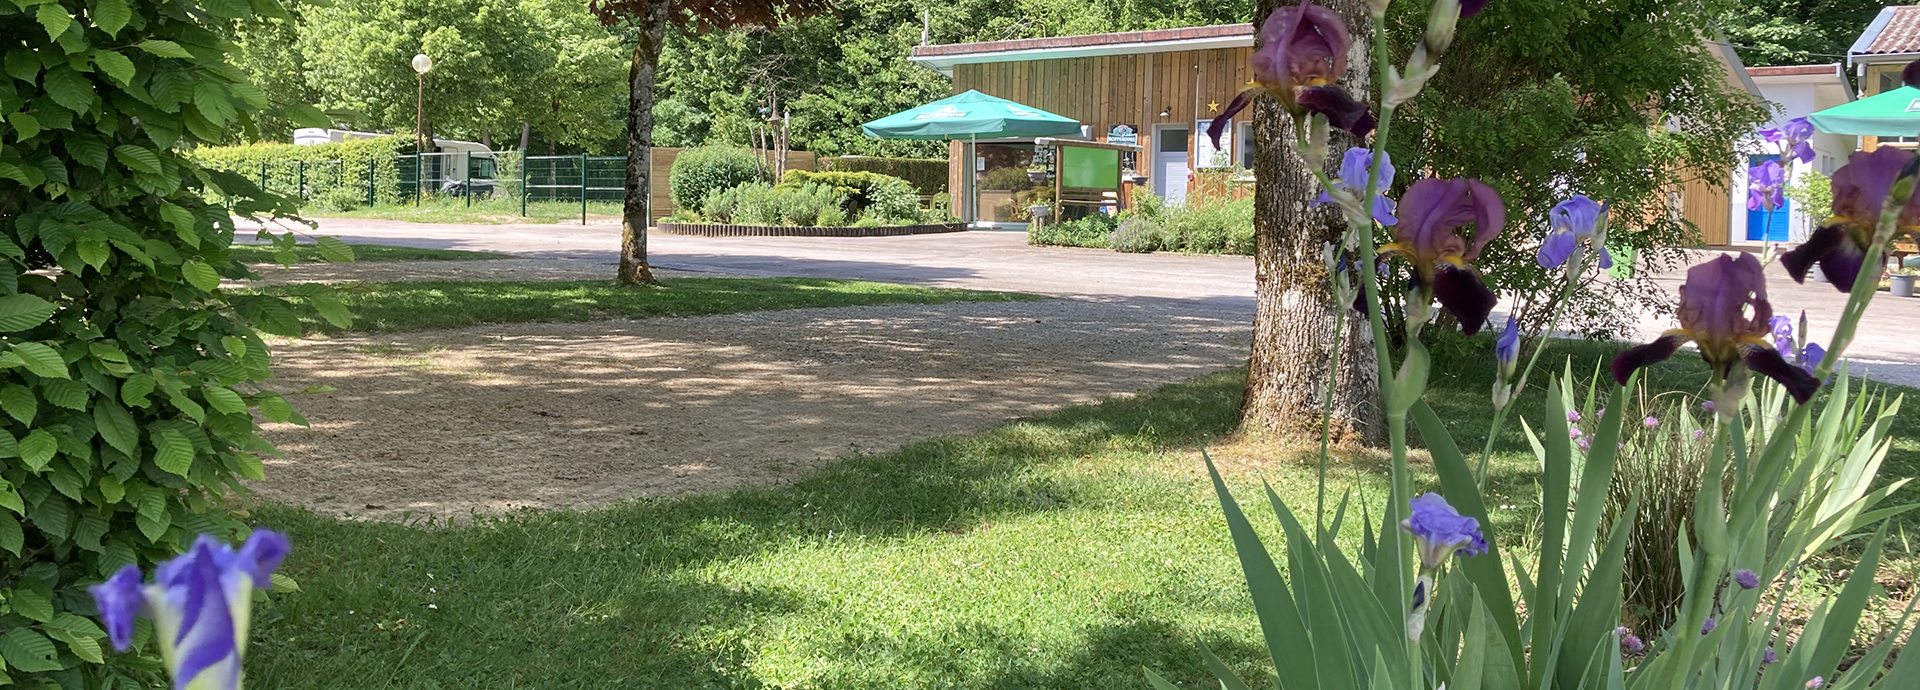 Contrexéville Campsite in Vosges, welcoming you in a green setting.